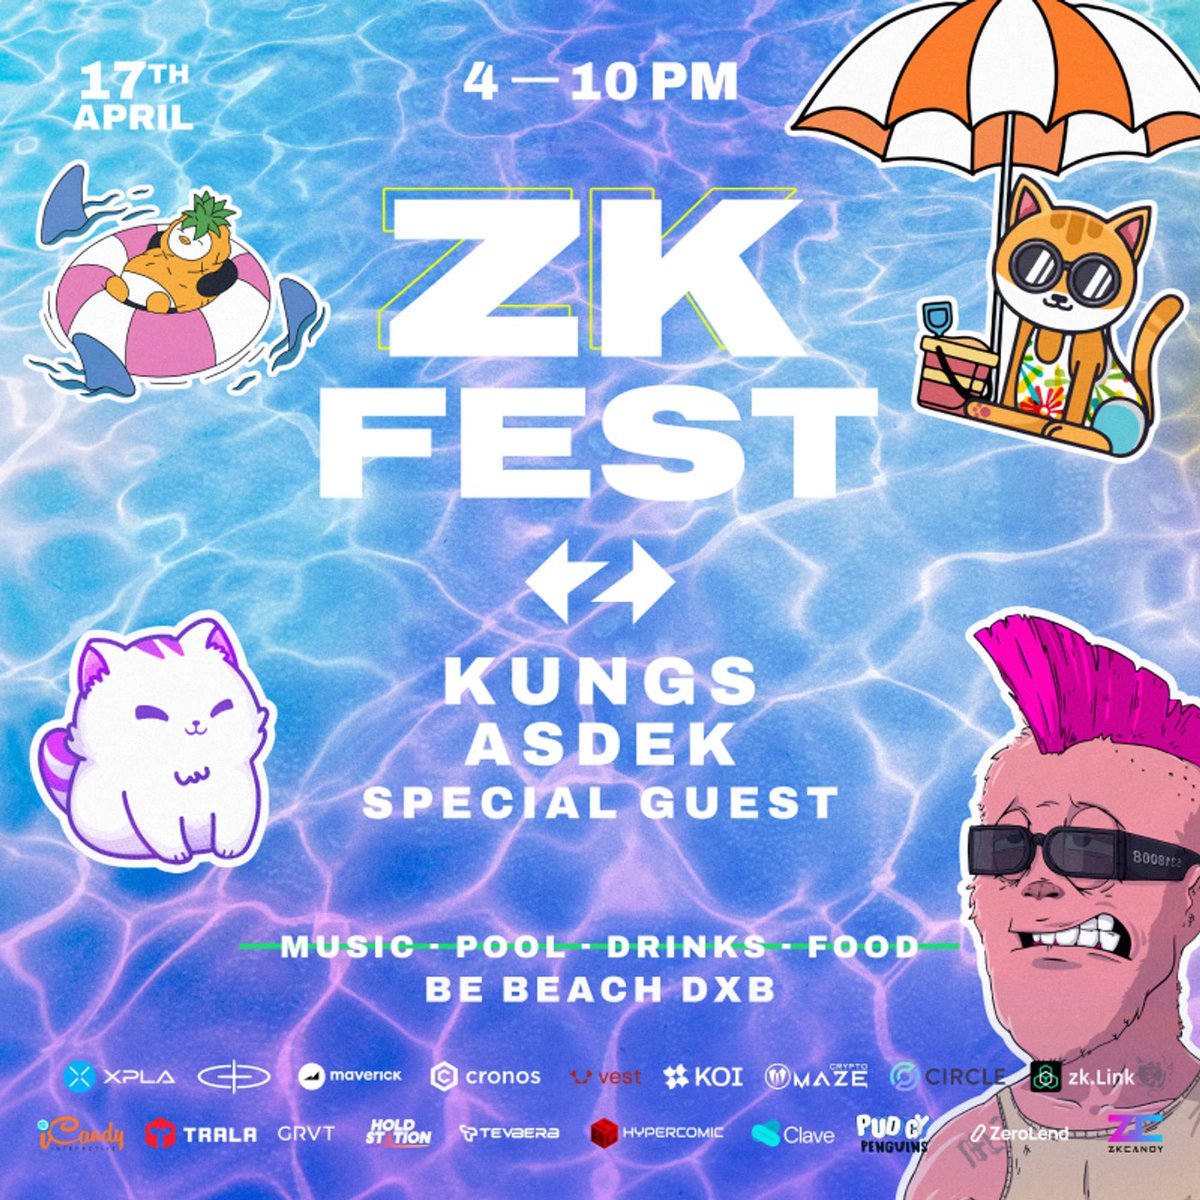 Get ready to unlock the block at ZK FEST with @CryptoMazeApp 😎 Register Lu.ma/ZKFEST a day/night of electrifying beats with DJs @KungsMusic , @asdekofficial and special guest at Beach DXB in Dubai 🎶✨ Join us for a pre-party like no other the day before #Token2049